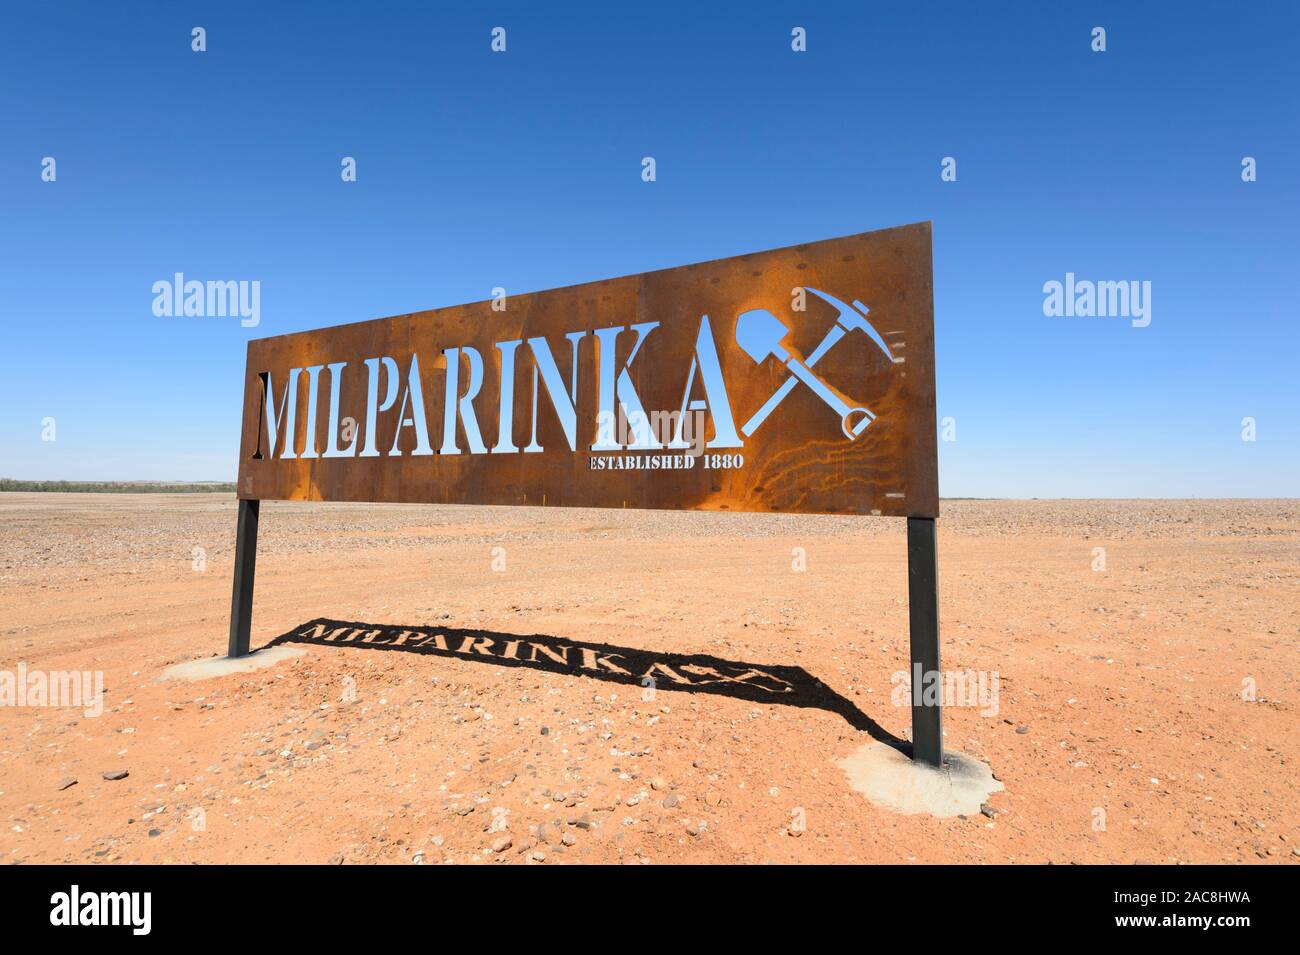 Name sign for the small Australian Outback town of Milparinka, New South Wales, NSW, Australia Stock Photo